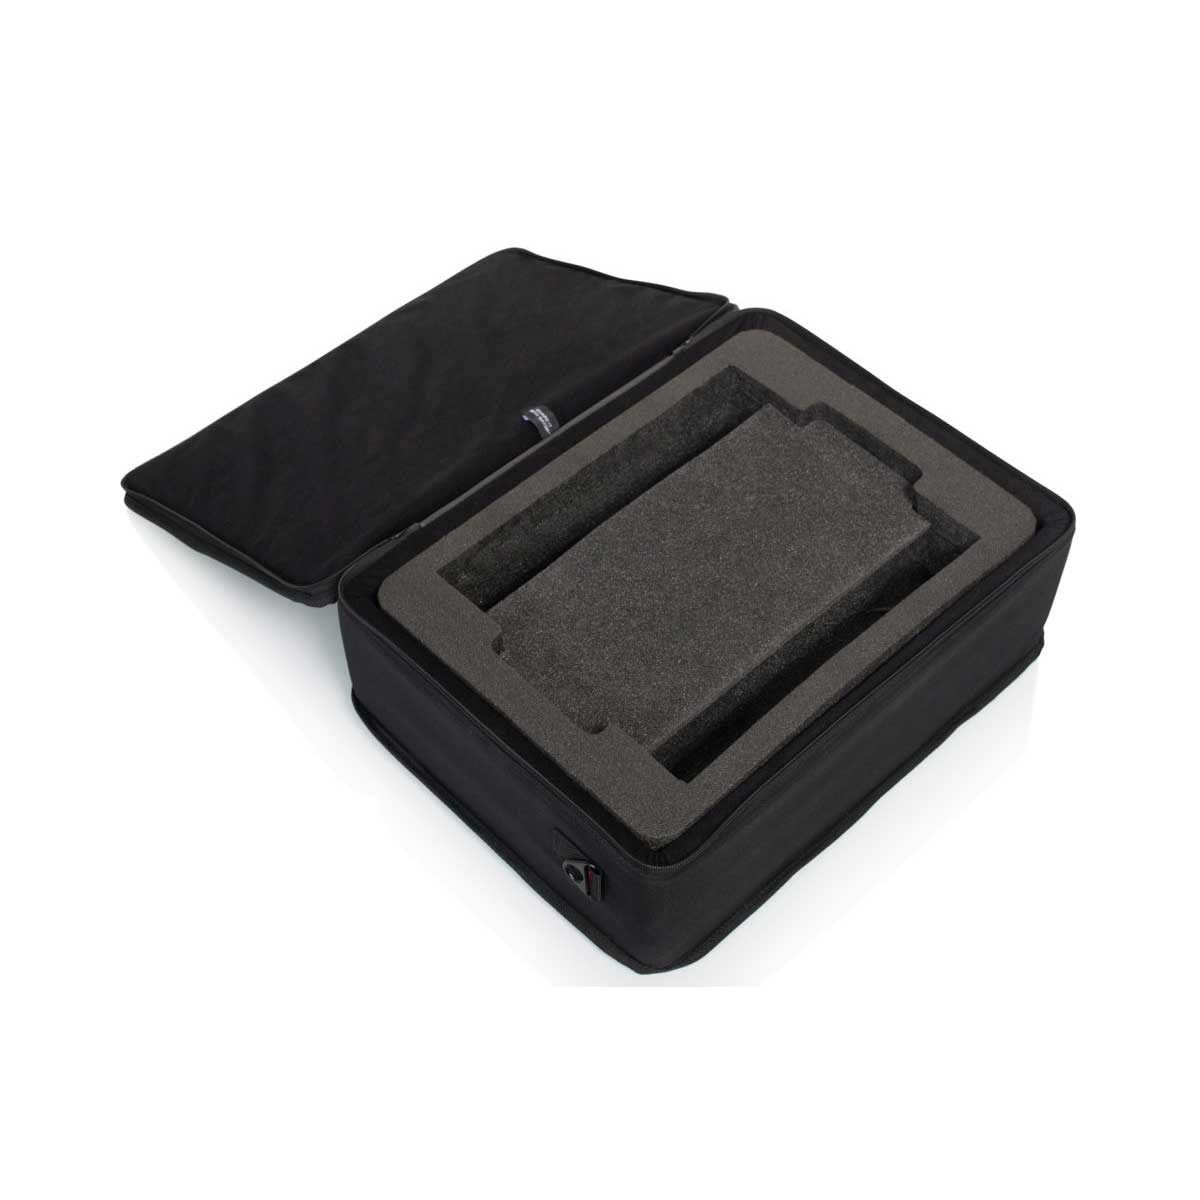 Gator GL-RODECASTER2 Lightweight Case For Rodecaster Pro & Two Mics